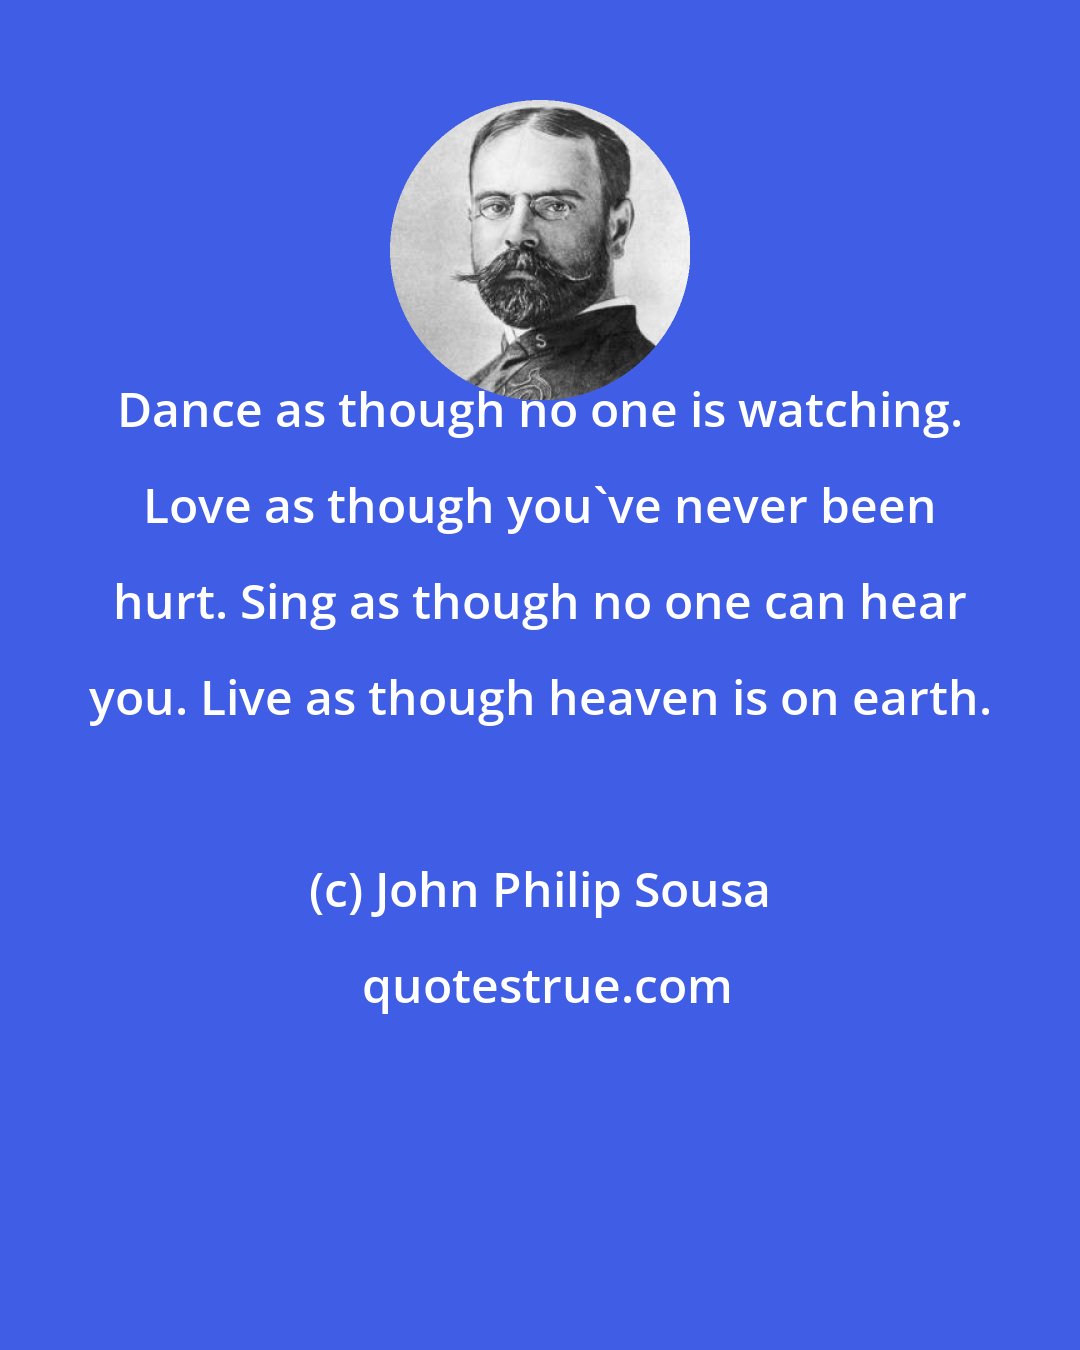 John Philip Sousa: Dance as though no one is watching. Love as though you've never been hurt. Sing as though no one can hear you. Live as though heaven is on earth.